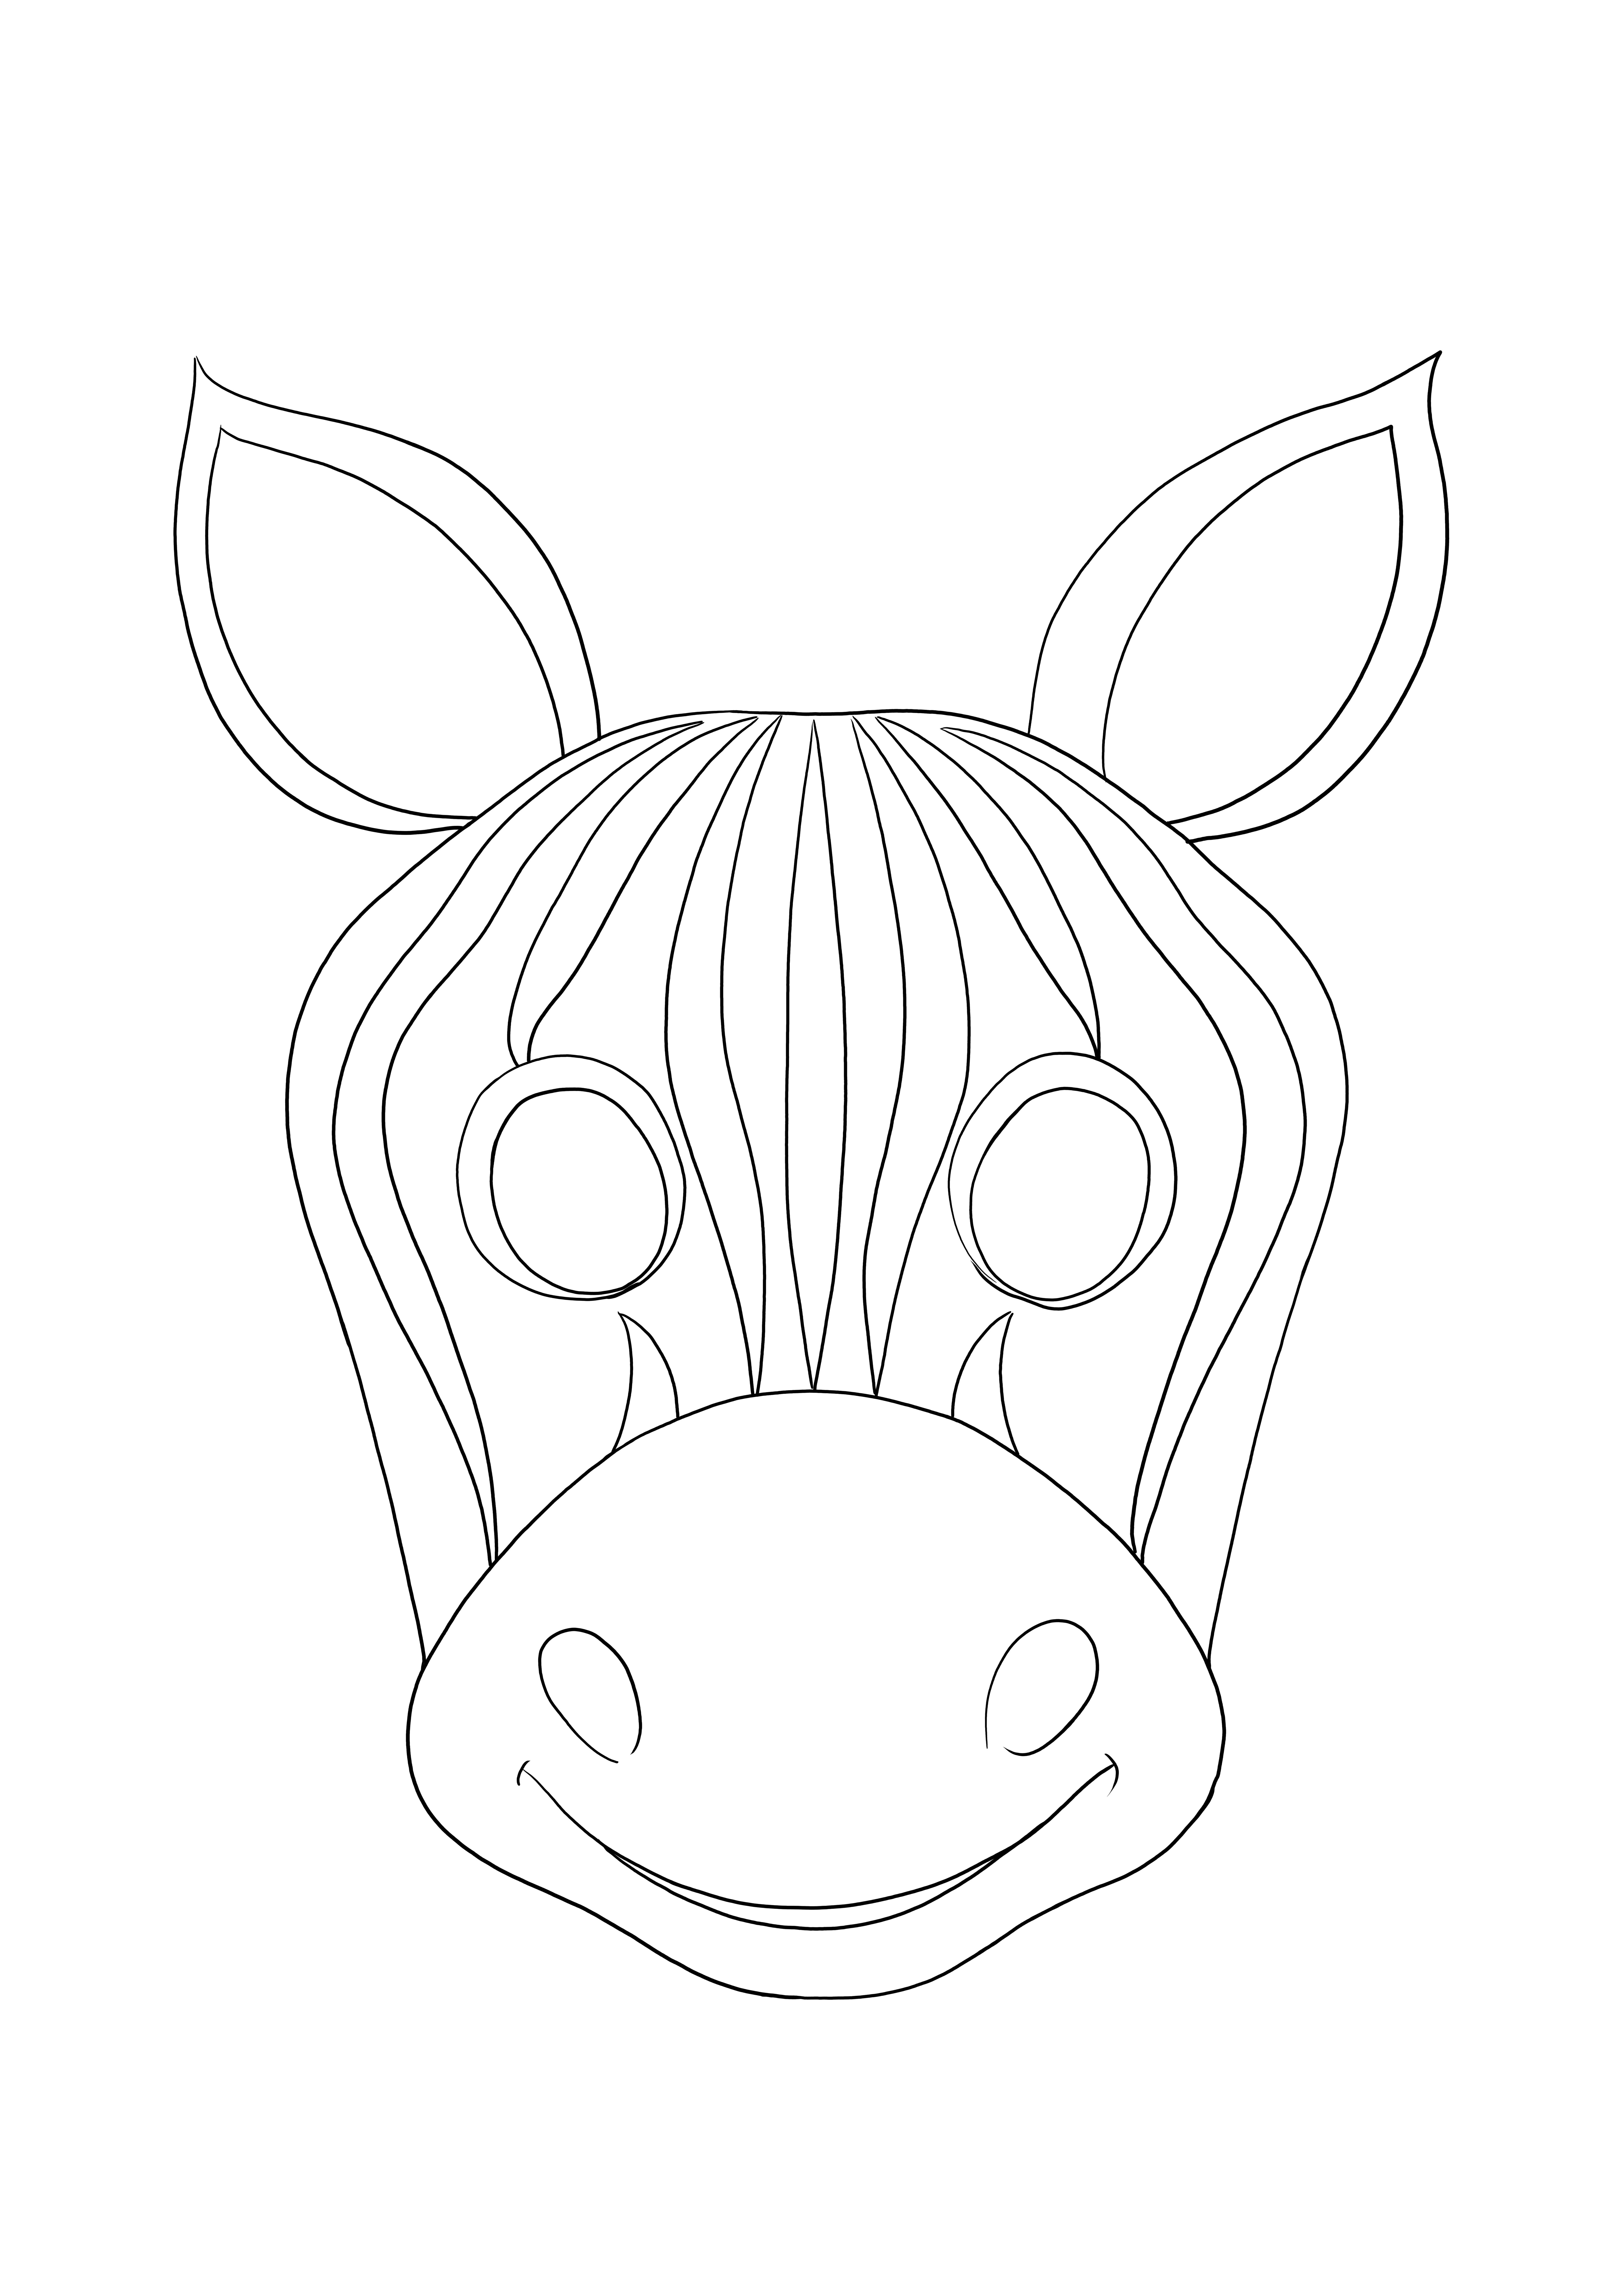 Simple and easy coloring of a zebra mask for free coloring and printing